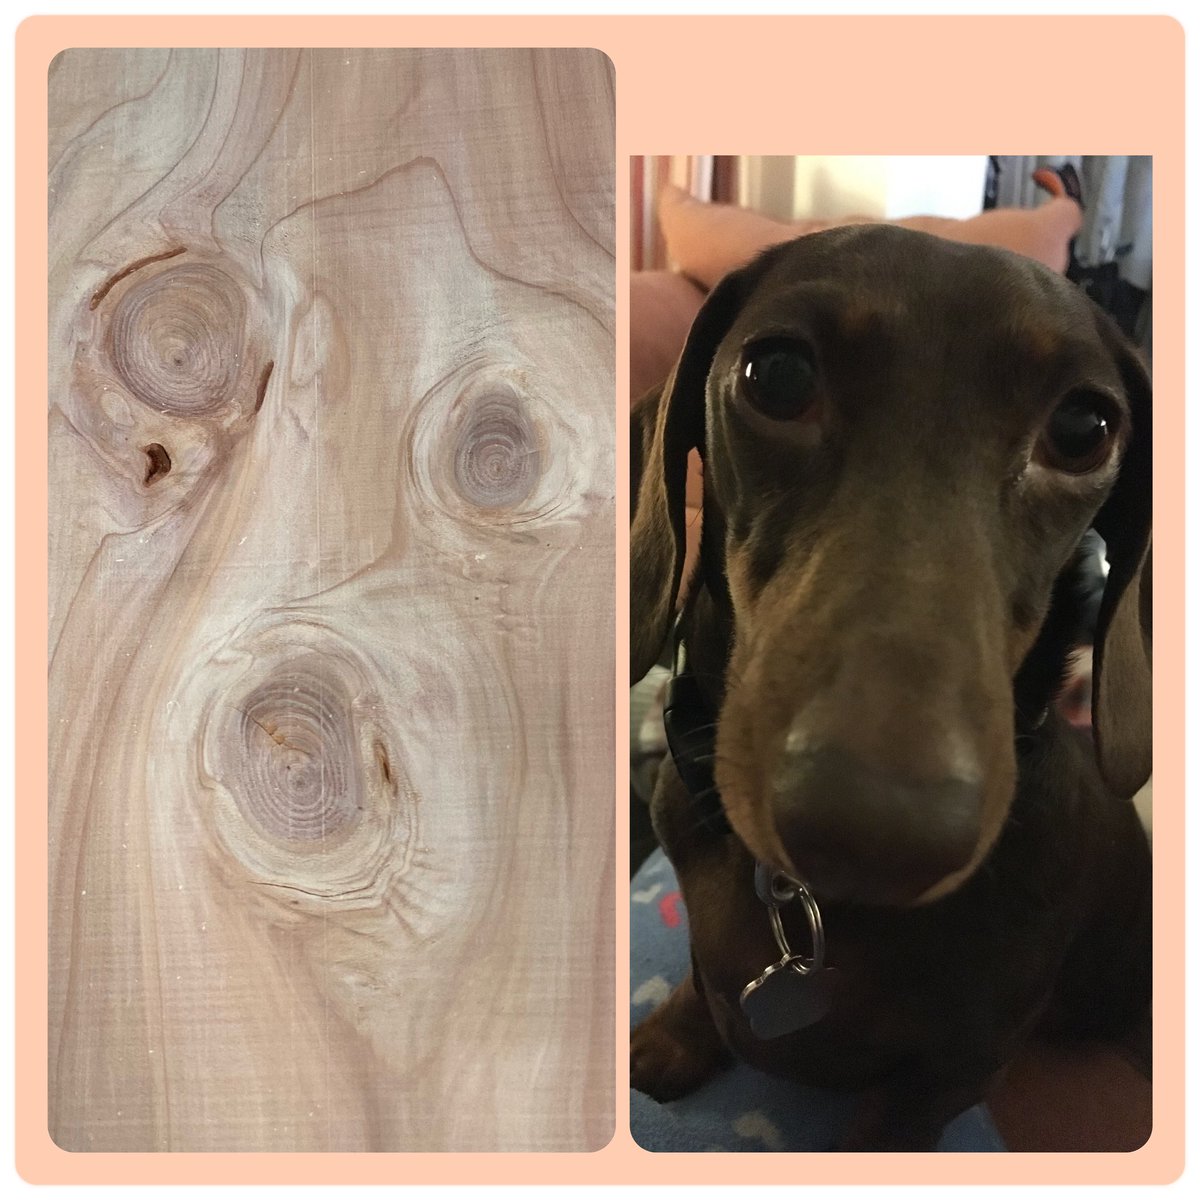 Well, we were quite chuffed to see our little girl’s face in a piece of Sequoia this week! 😆❤️#useyourimagination #faces #sausagedog #sequoia